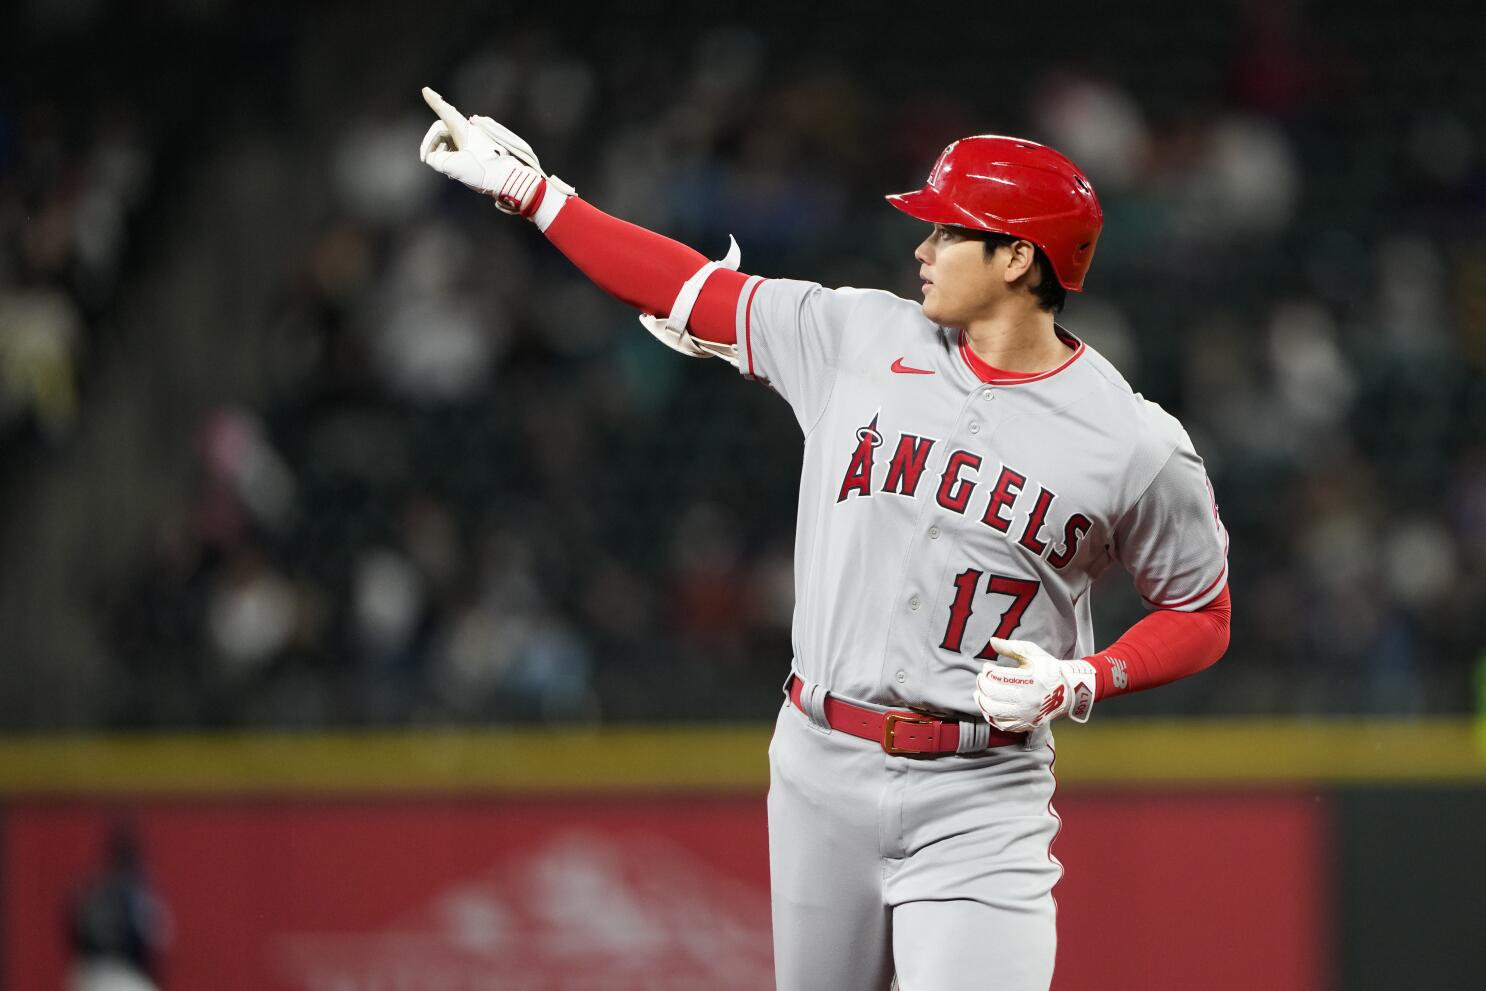 Shohei Ohtani's homer helps lift Angels past Mariners - Los Angeles Times